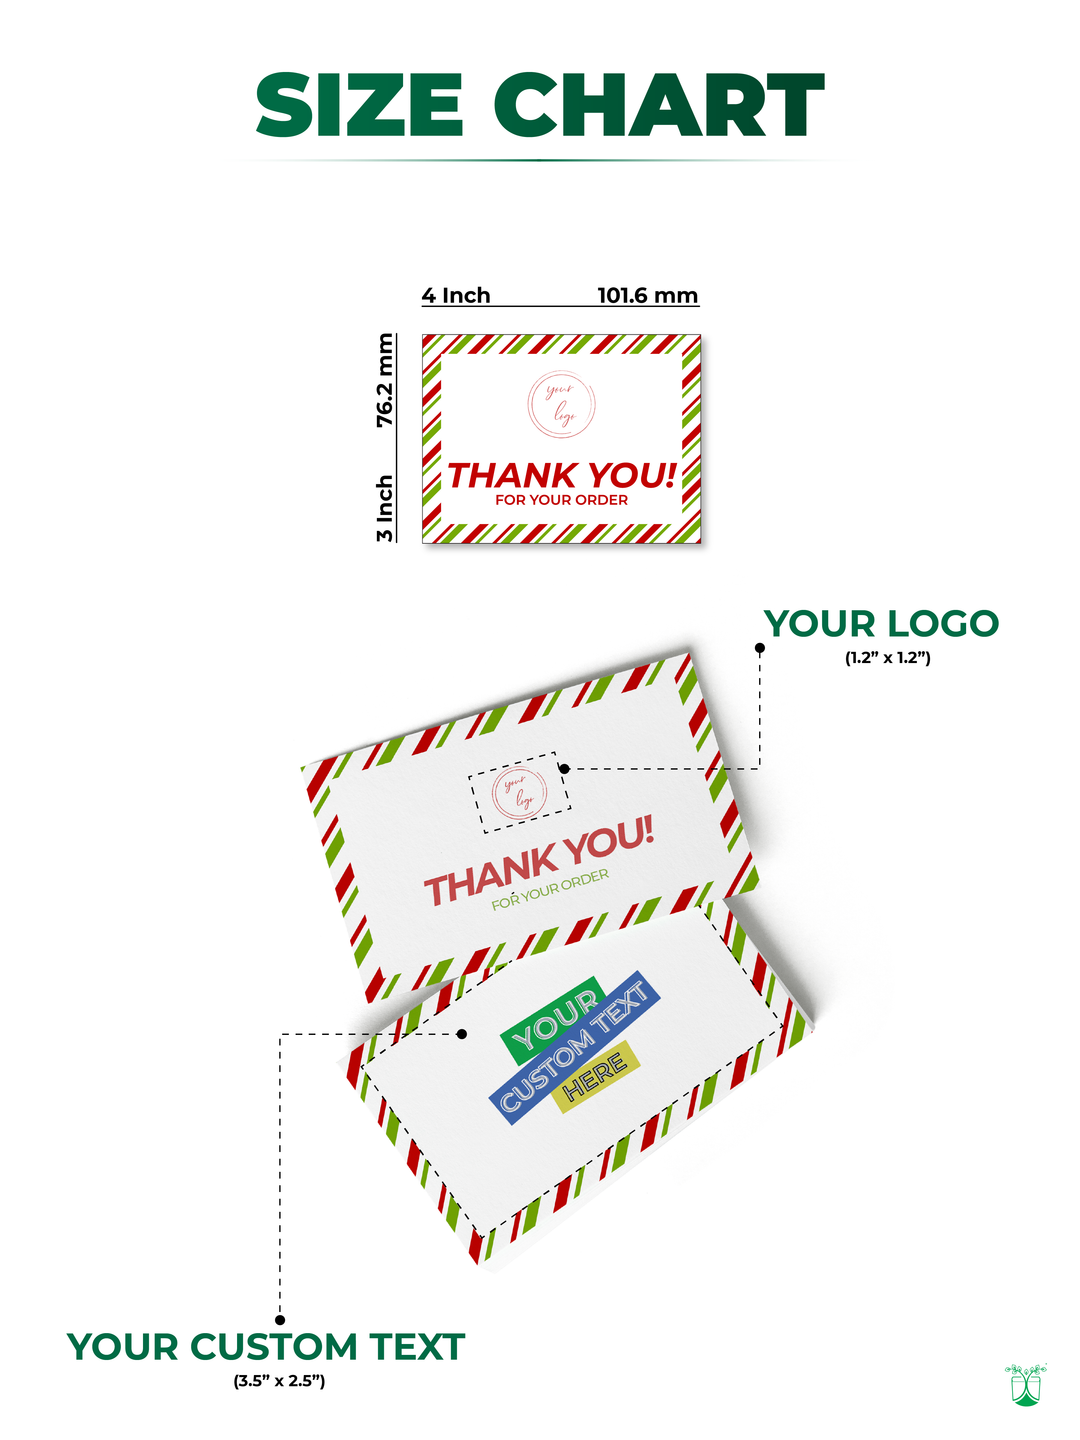 thank you cards | custom thank you cards | printed thank you cards | eco friendly thank you cards